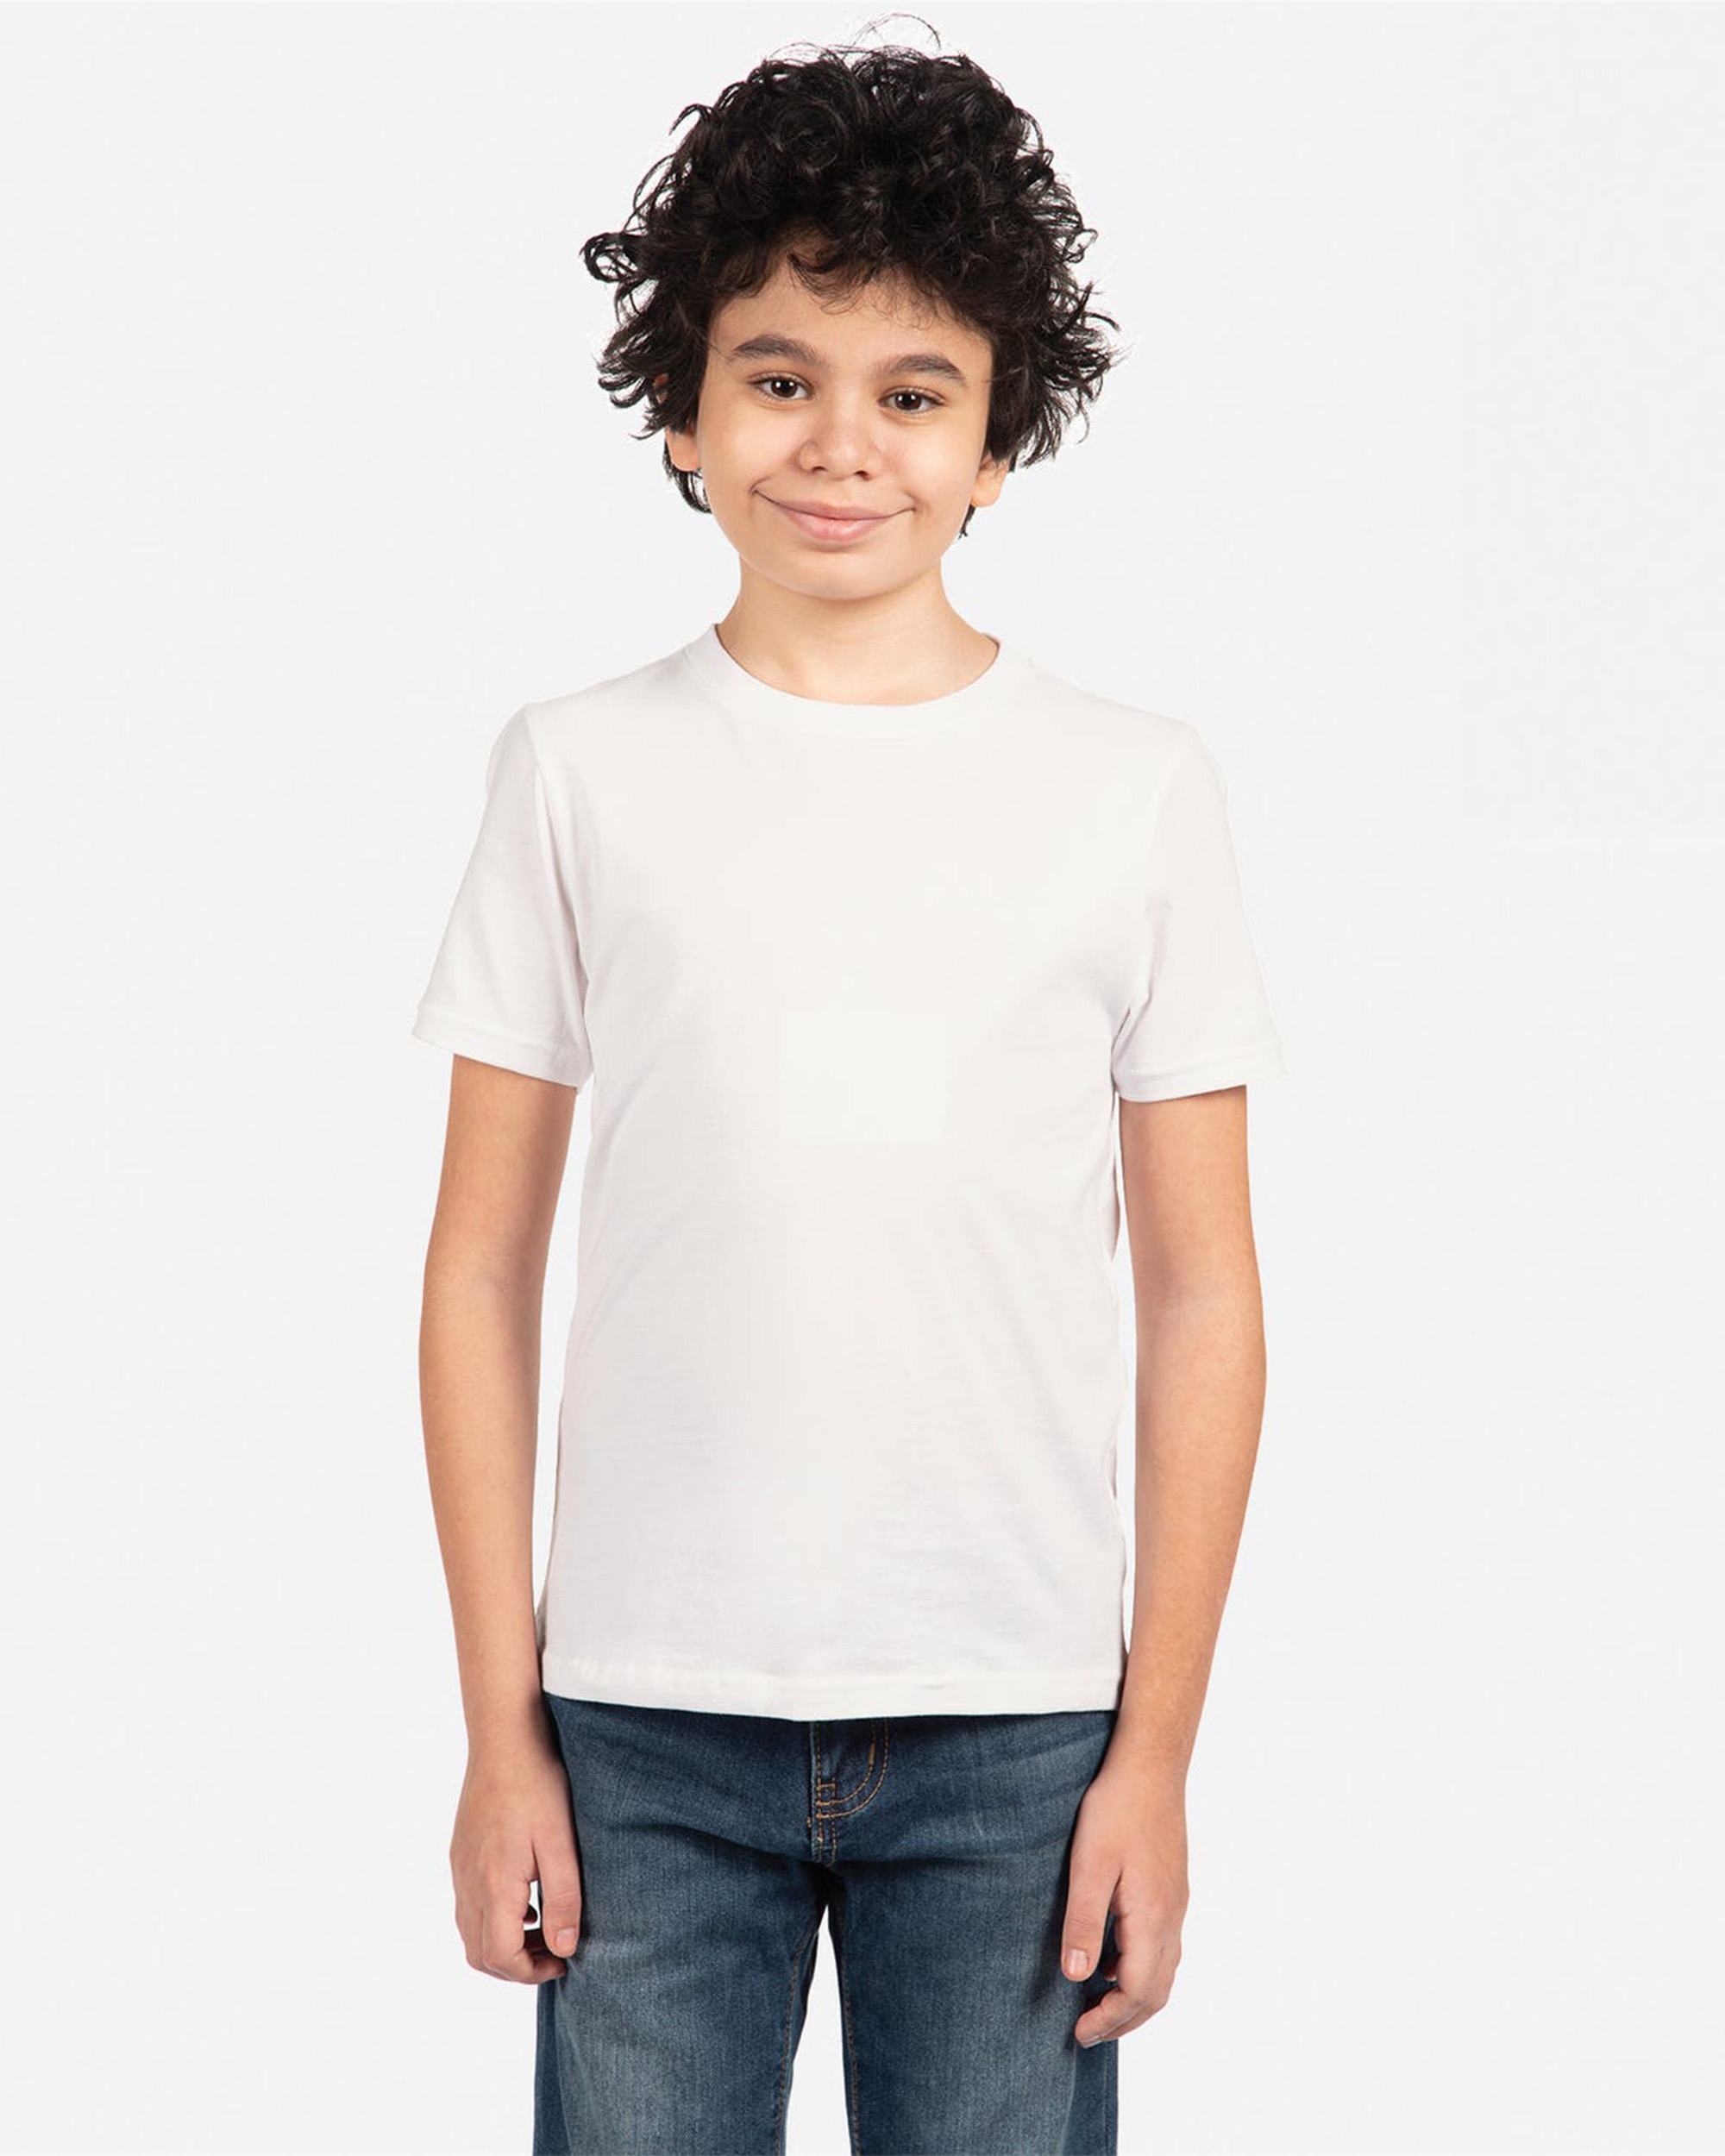 Next Level Apparel® 3310 Youth Cotton T-Shirt